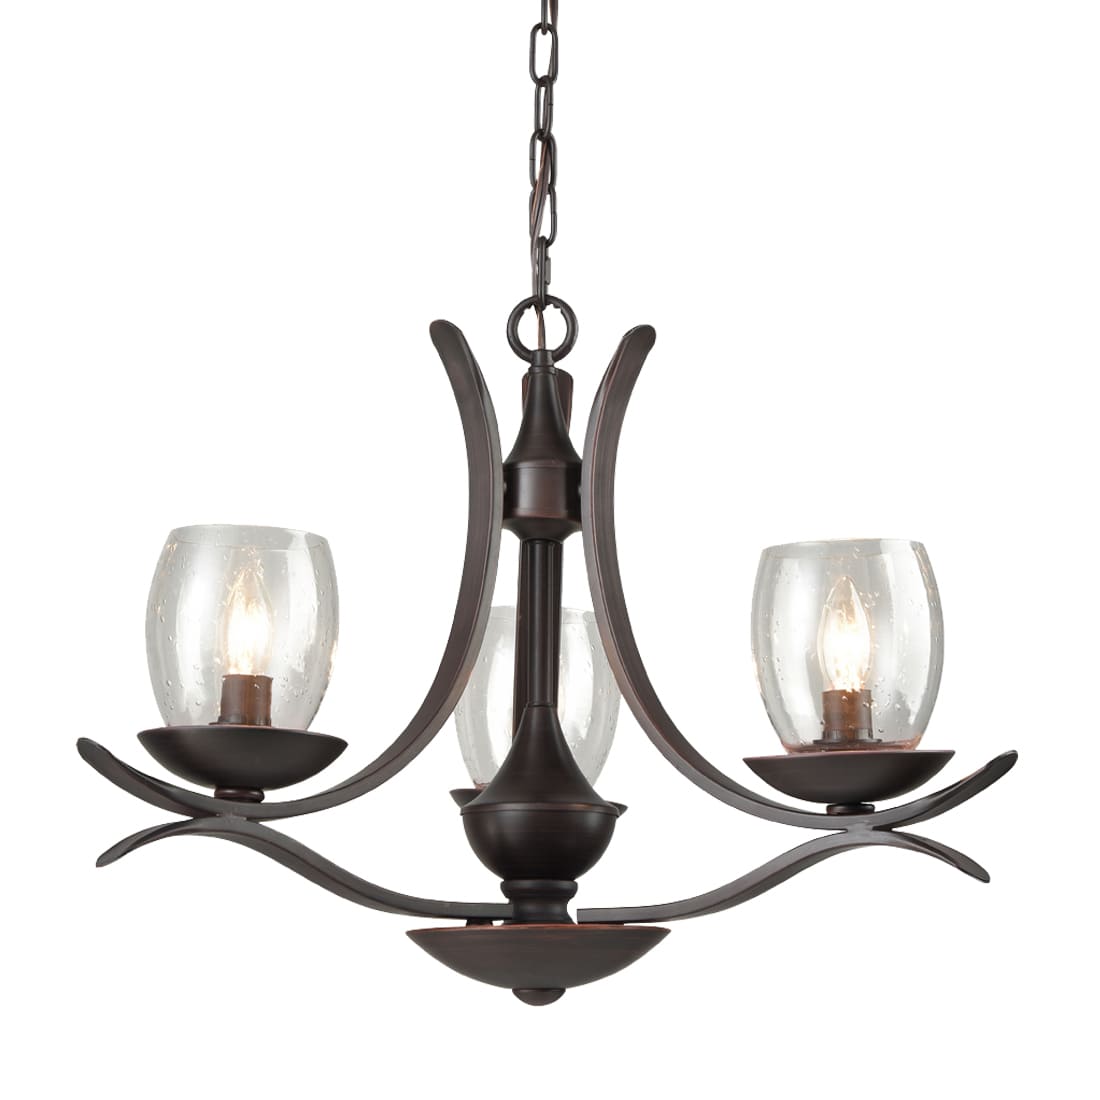 Rustic Bronze Dining Room Chandelier with Seeded Glass - 3 Light